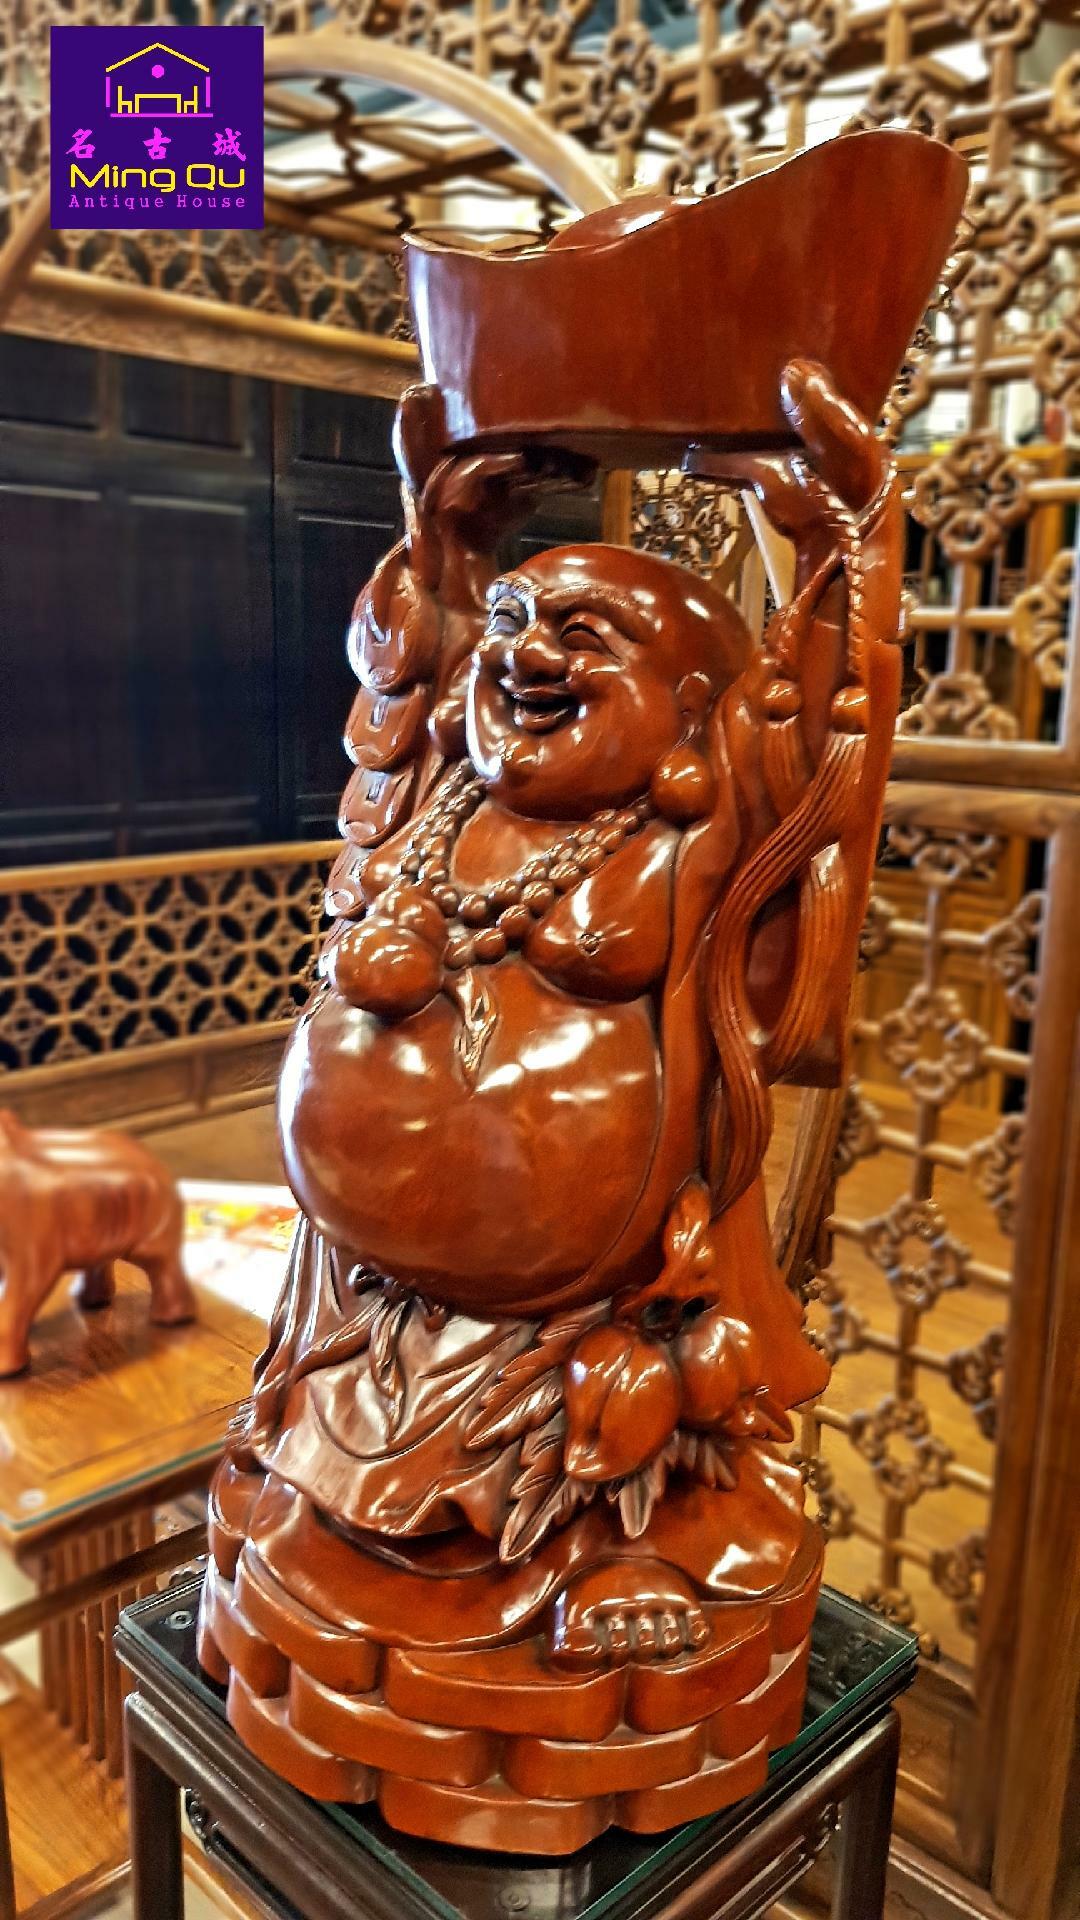 Statue and sculpture 雕刻品– Ming Qu Antique House 名古城古董傢俬屋